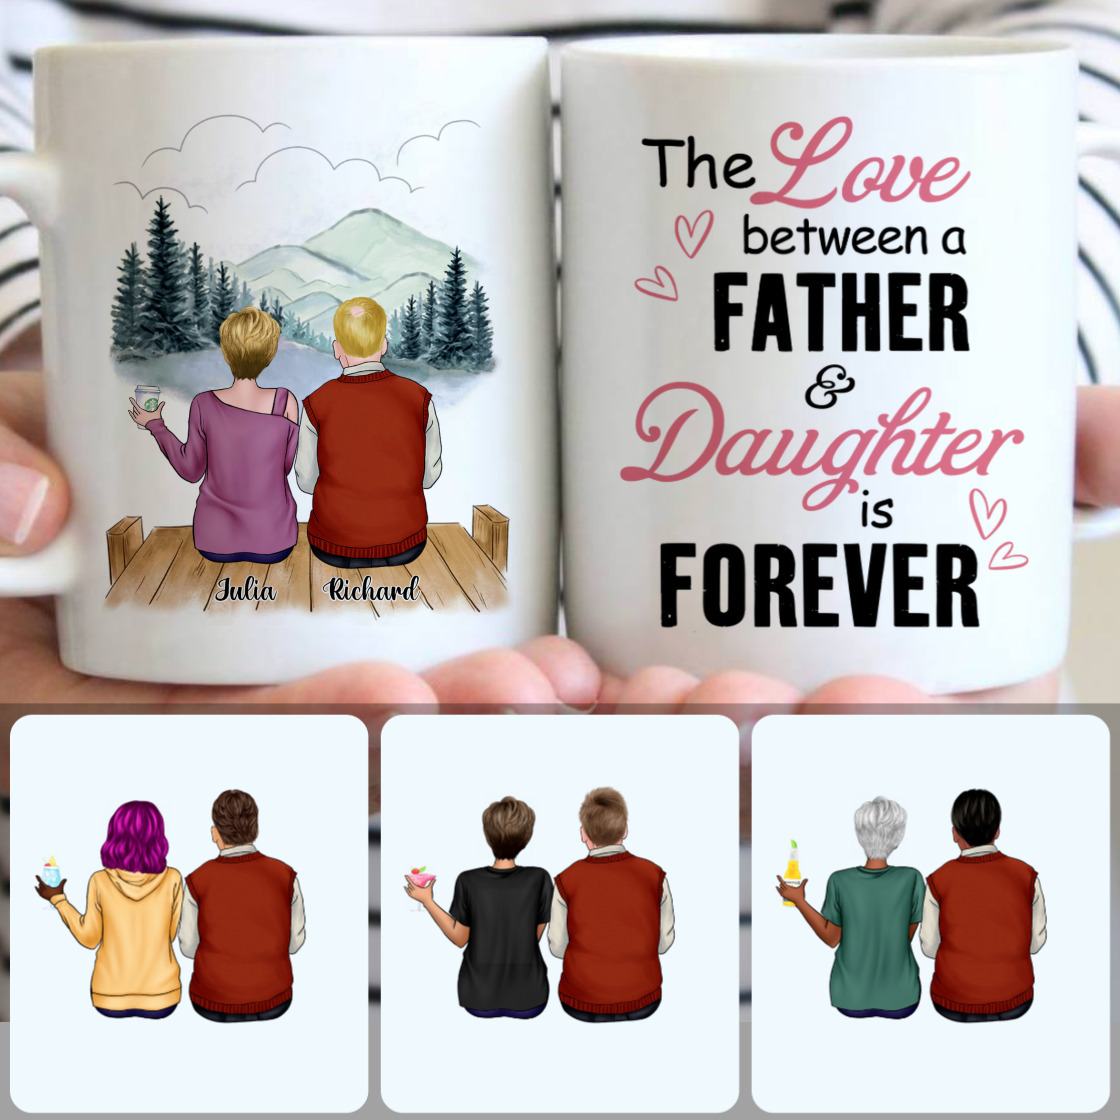 Personalized Mug, Memorial Gifts For Dad Papa, Father & Daughter Customized Coffee Mug With Names